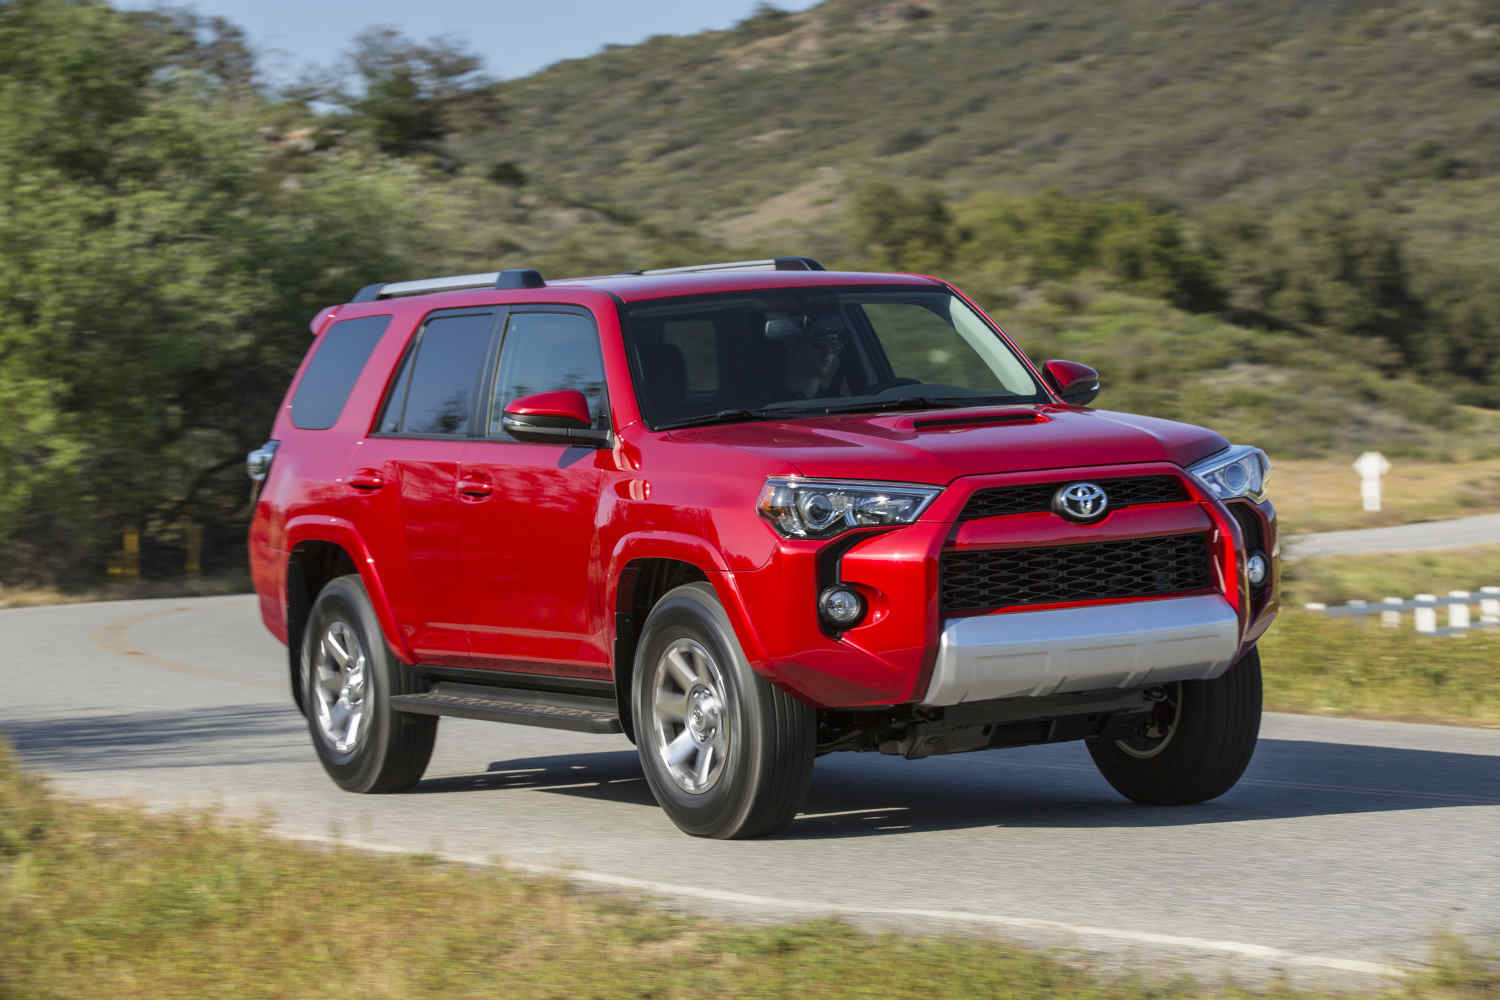 The fully-loaded 2018 Toyota 4Runner cost is over $40,000